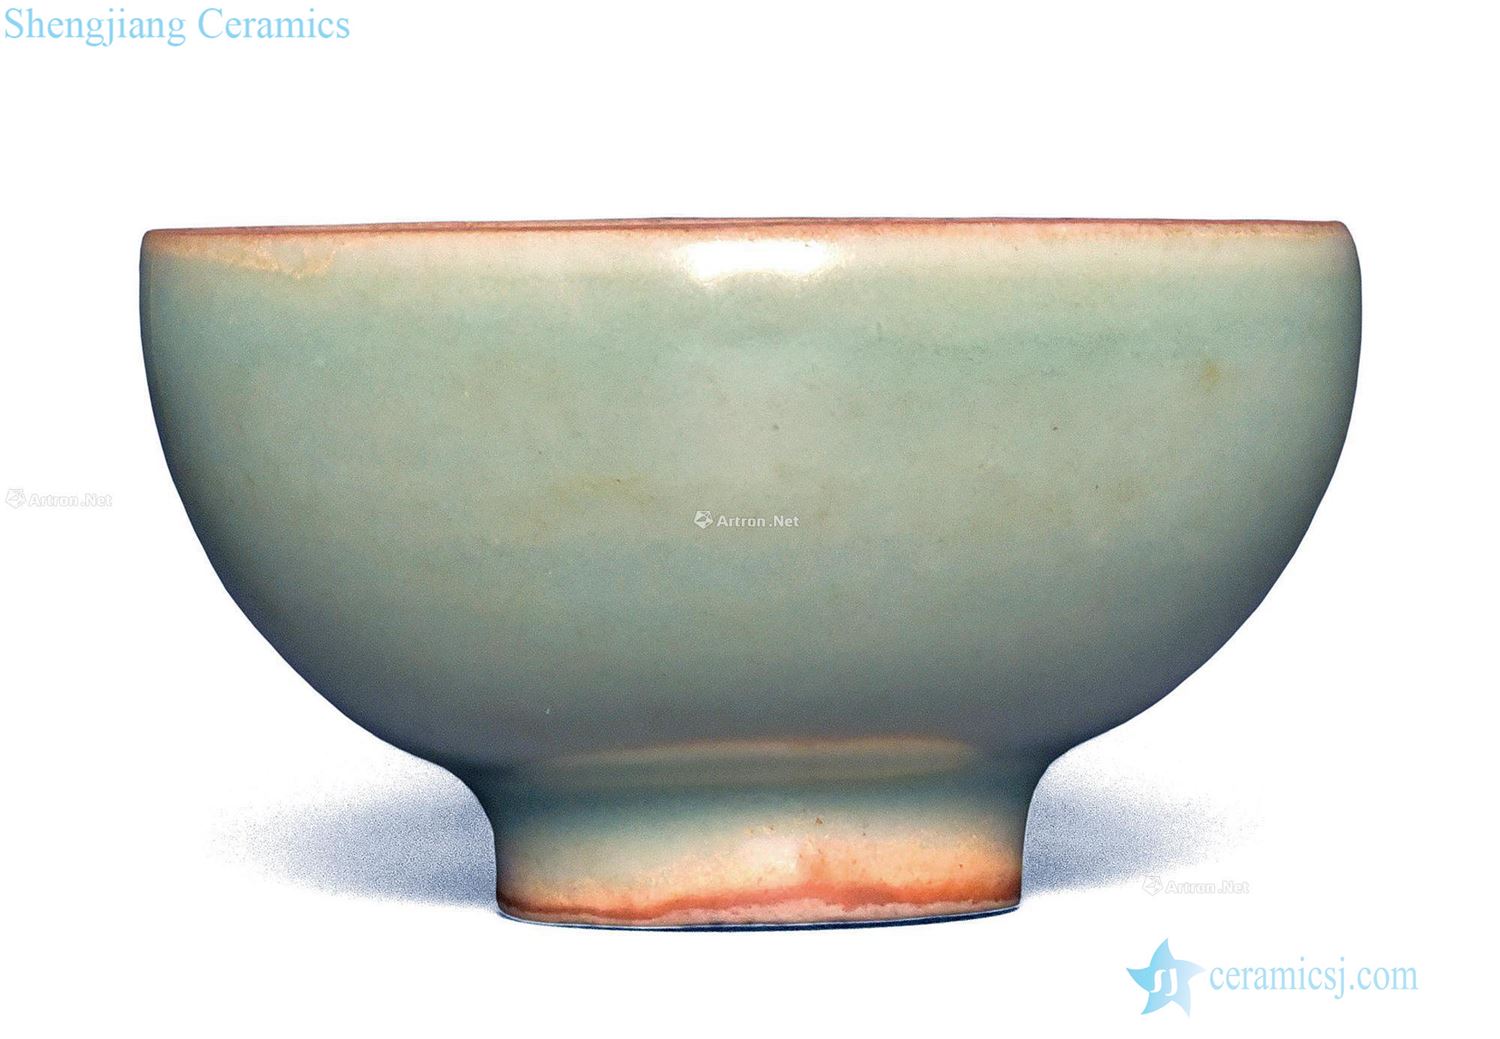 The southern song dynasty Longquan celadon glaze small lamp